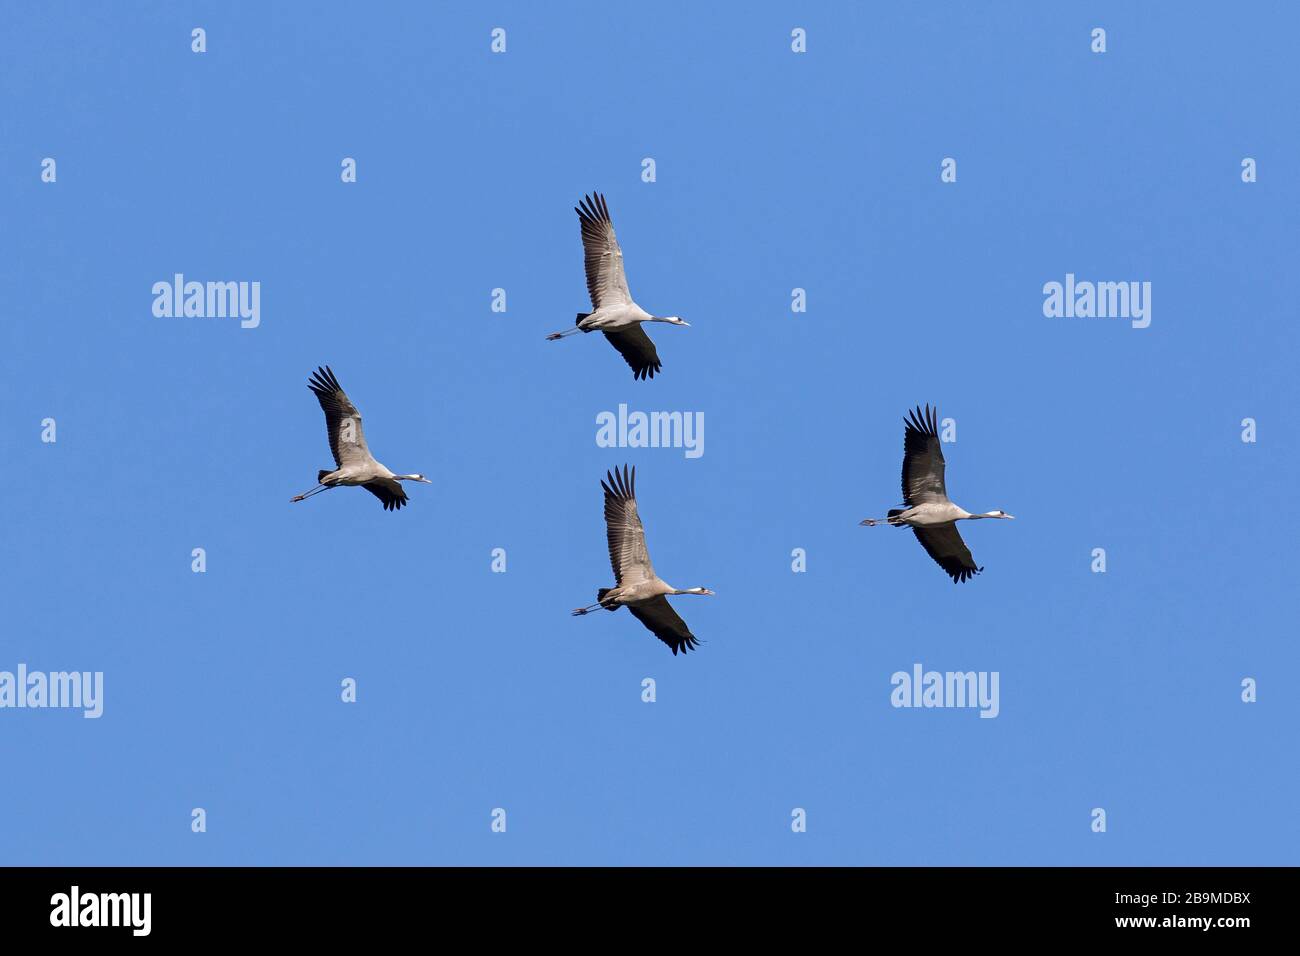 Four migrating common cranes / Eurasian crane (Grus grus) flying / thermal soaring against blue sky during migration Stock Photo